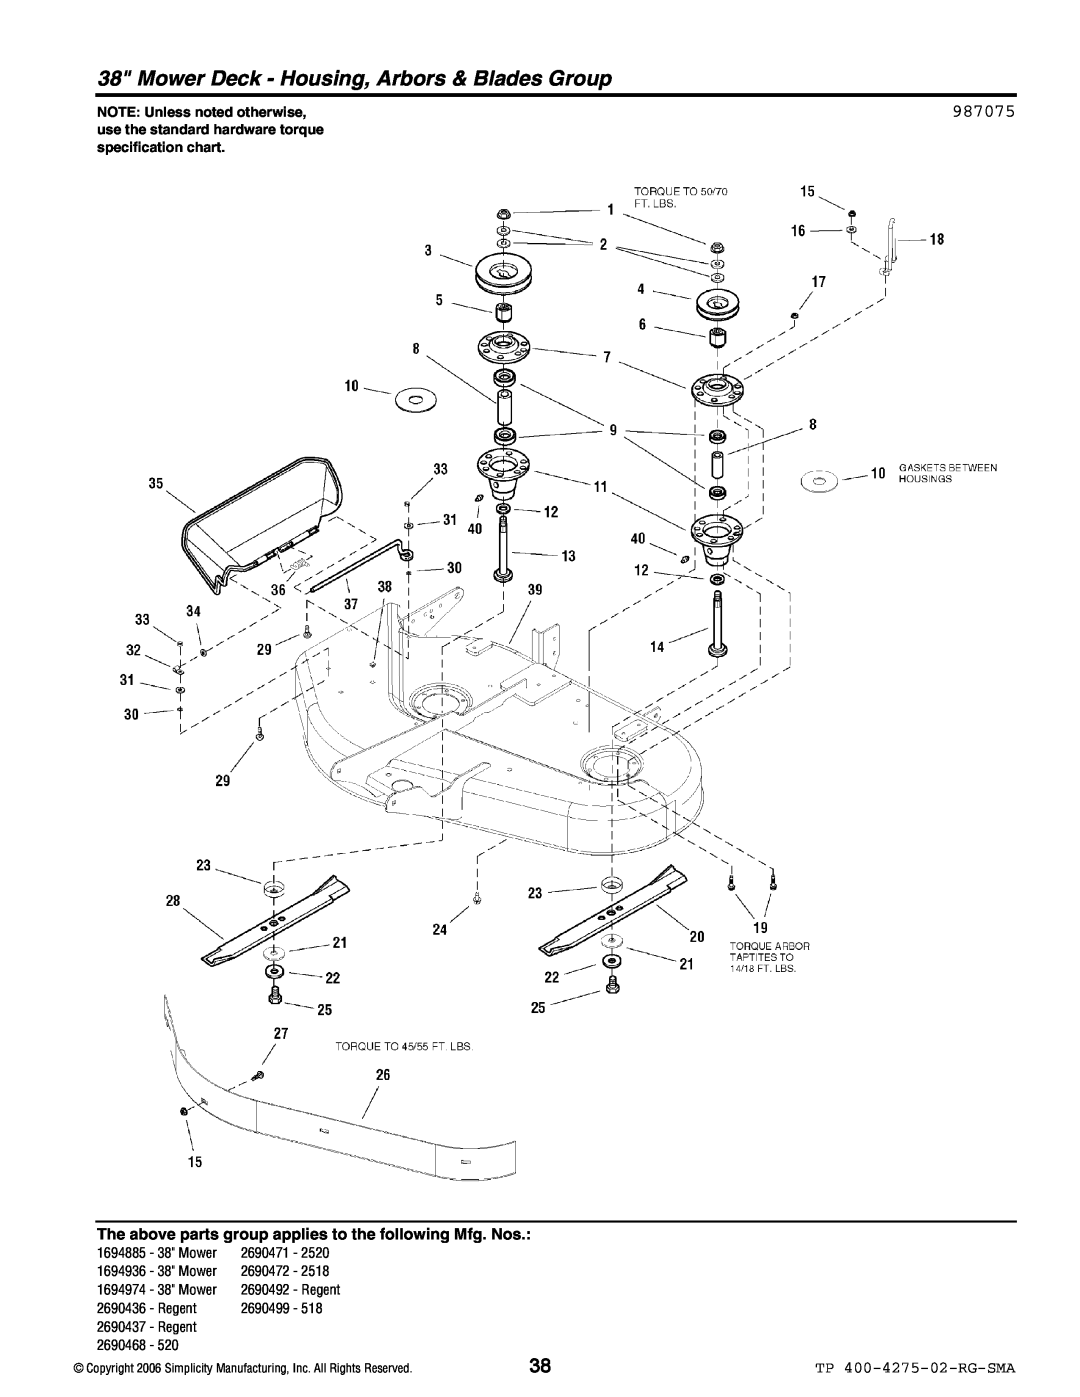 Simplicity 18.5HP Mower Deck - Housing, Arbors & Blades Group, 987075, TP 400-4275-02-RG-SMA, NOTE Unless noted otherwise 